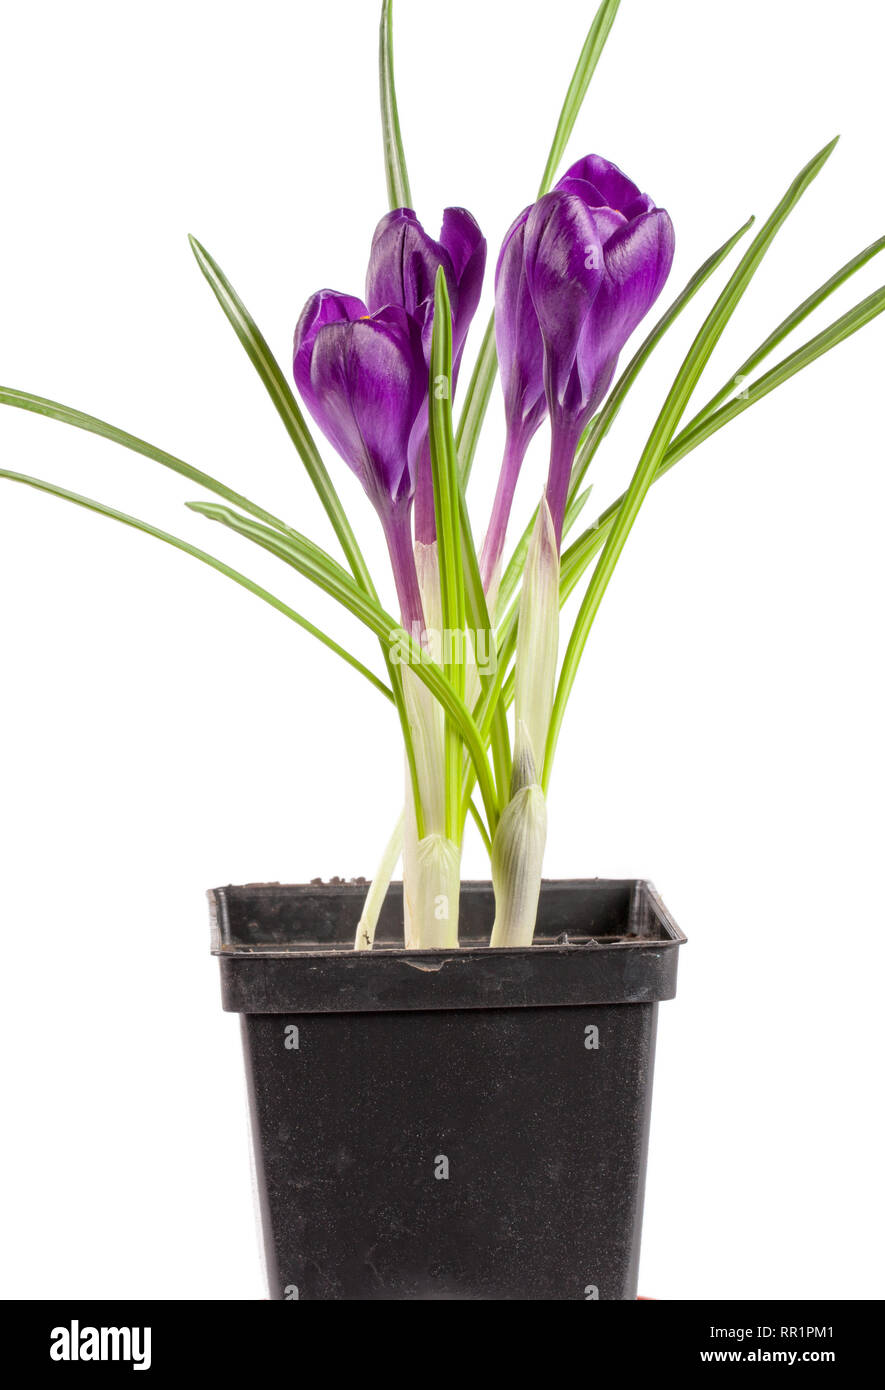 Crocus Flower In Pot High Resolution Stock Photography and Images - Alamy